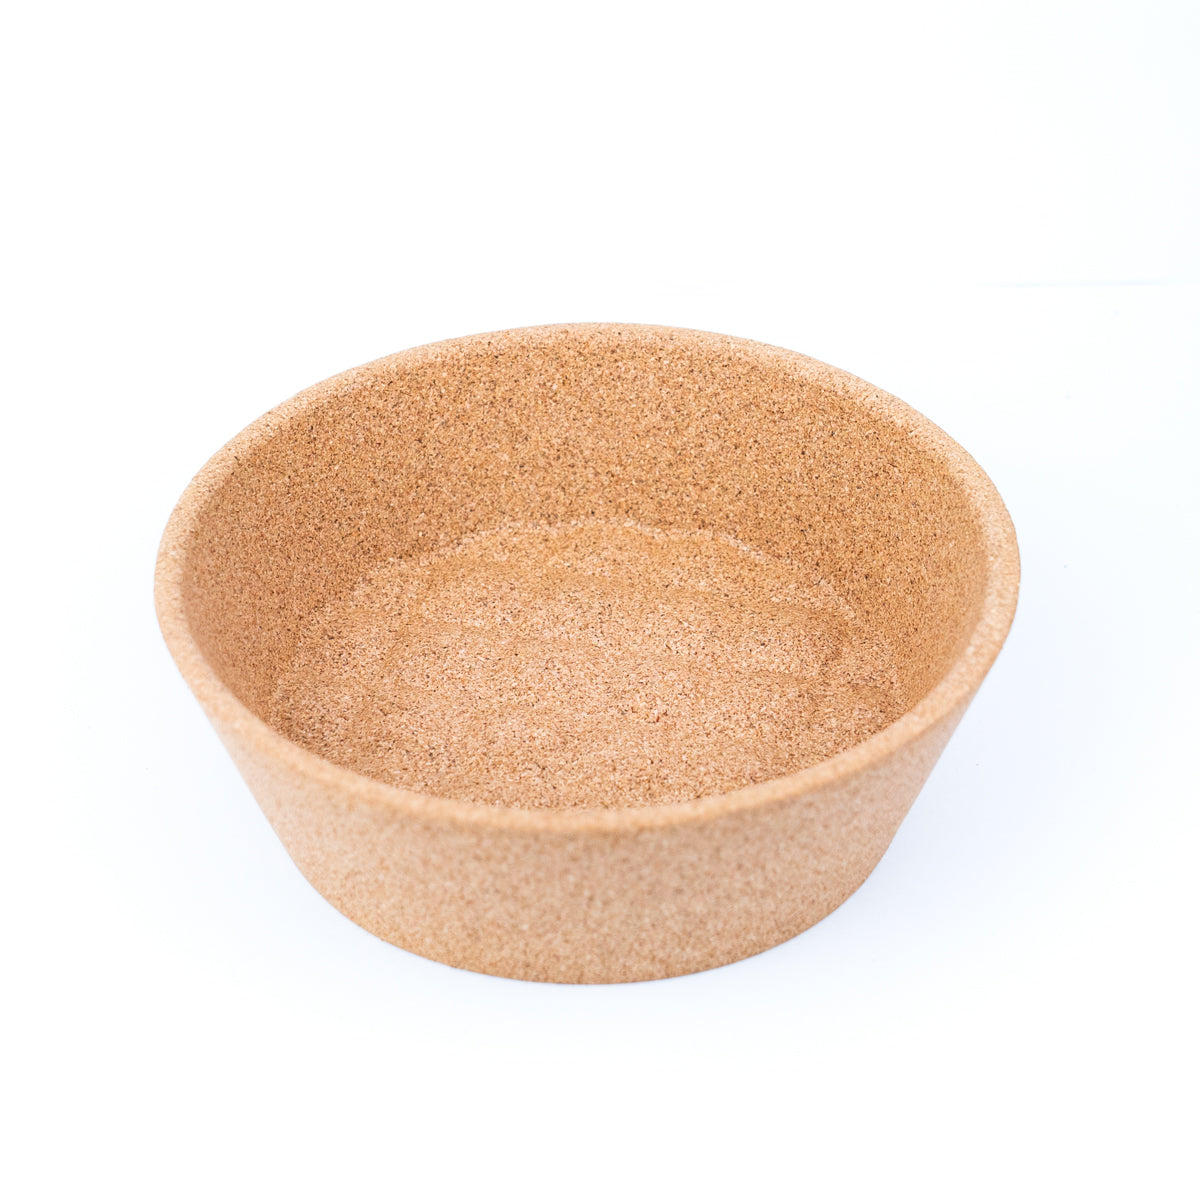 Cork Snack Bowl | THE CORK COLLECTION